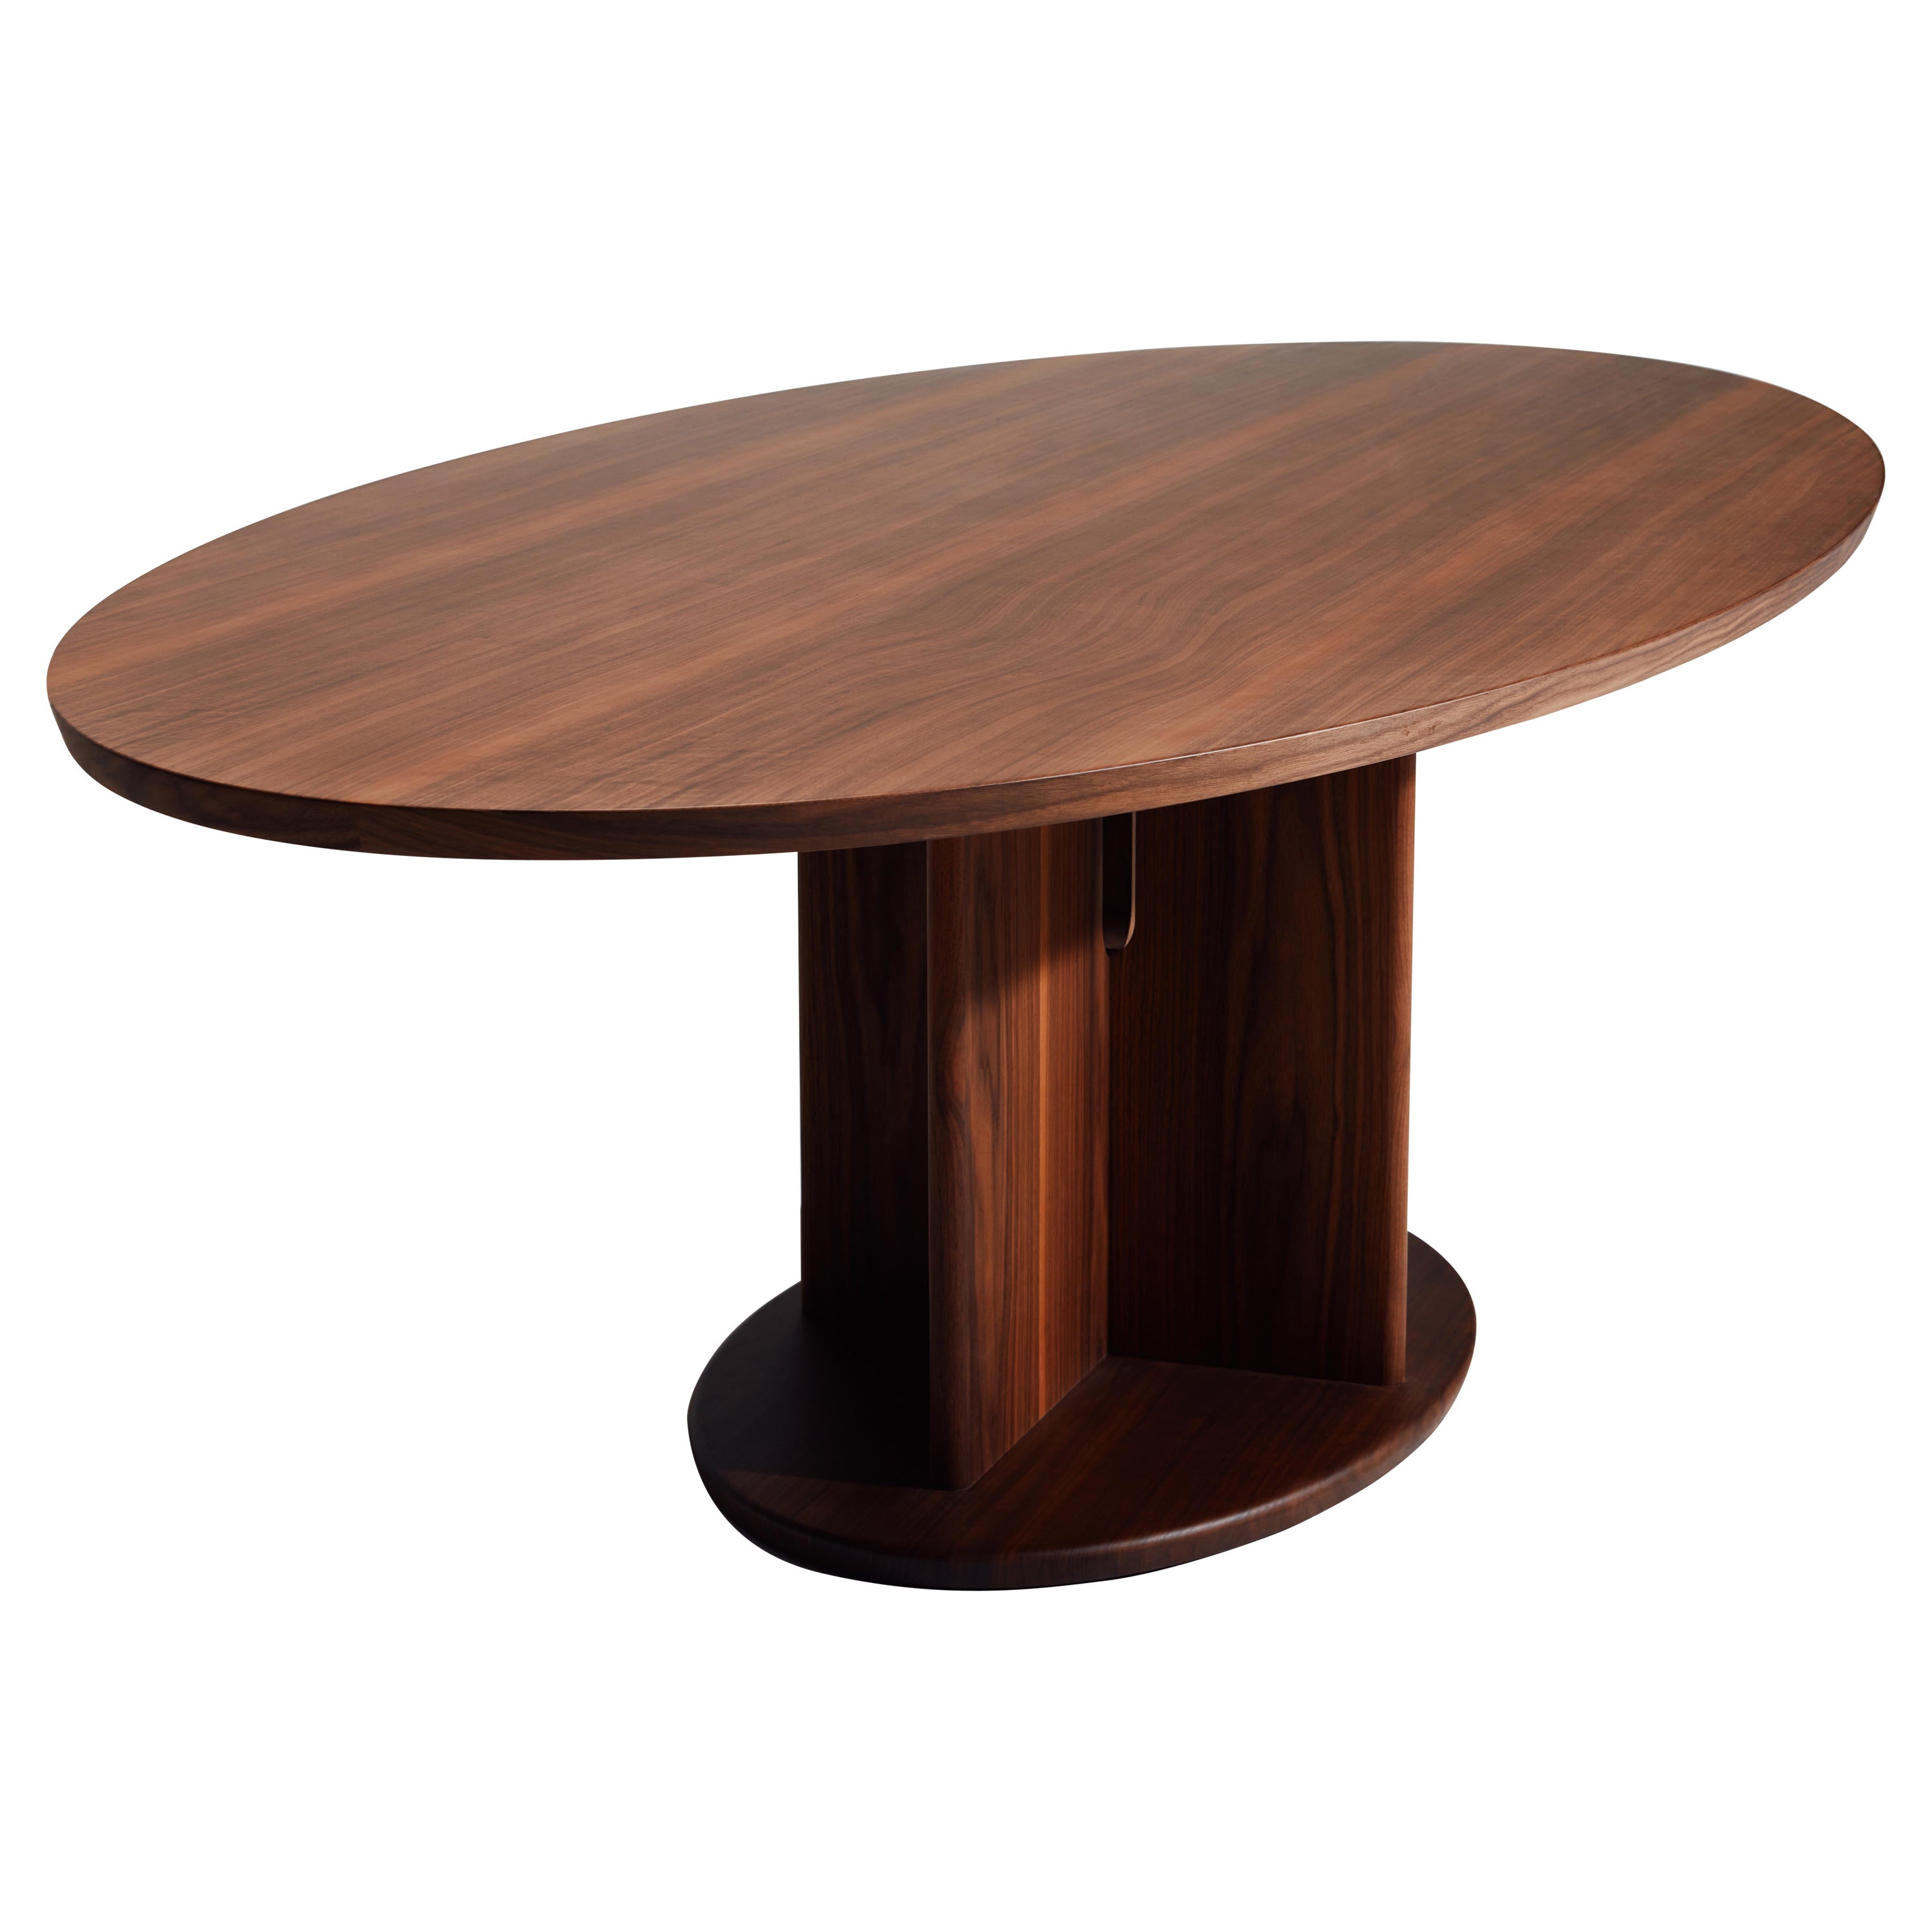 Intersection Oval Table by Neri&Hu